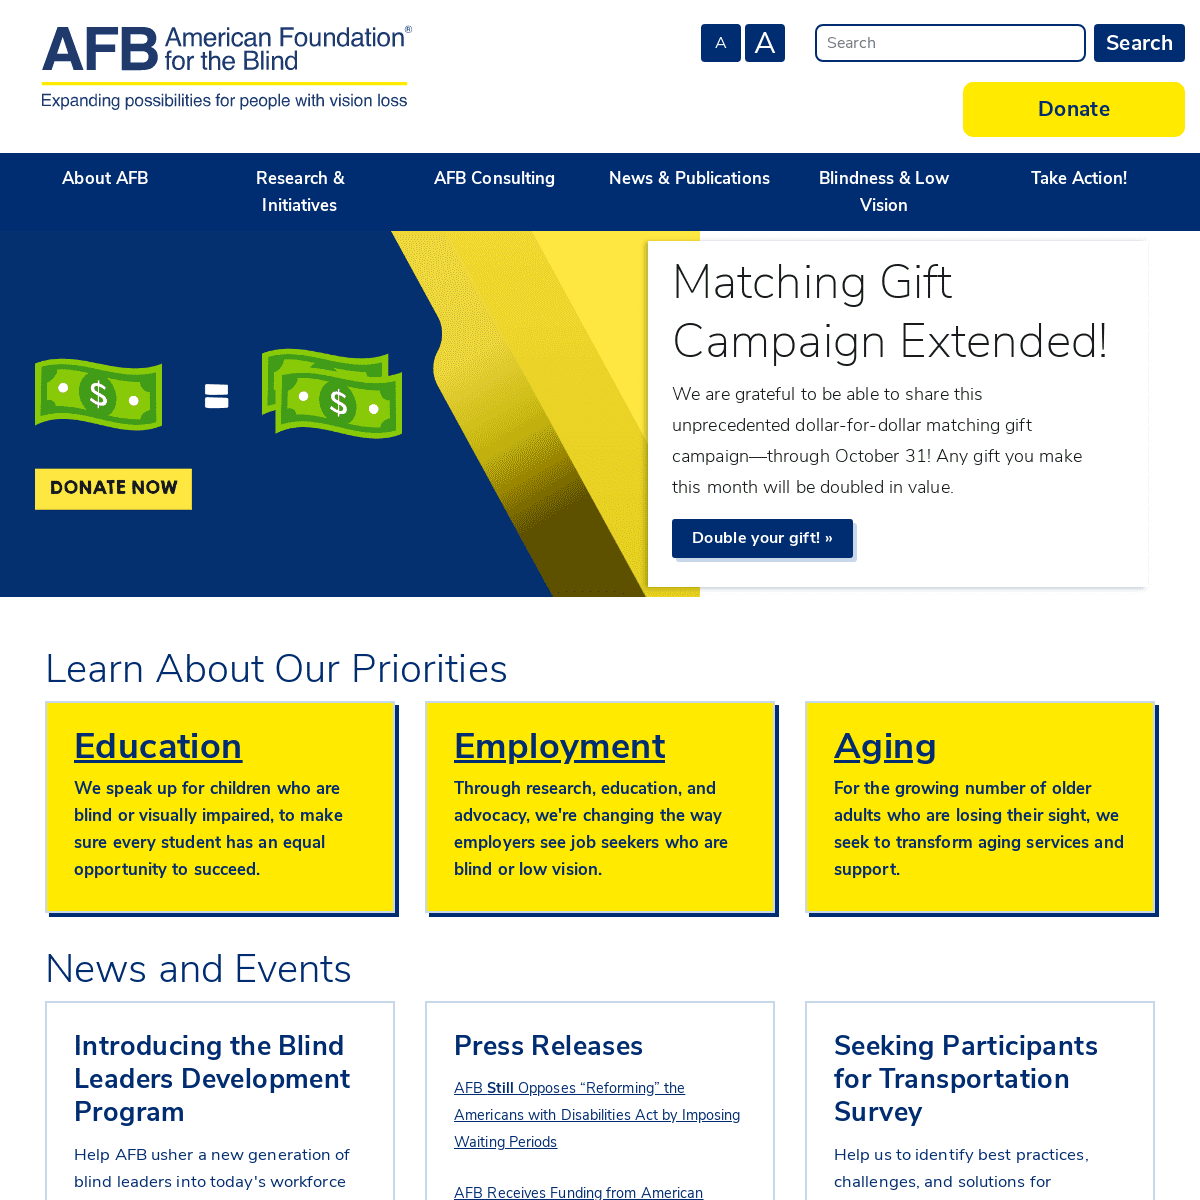 A complete backup of afb.org